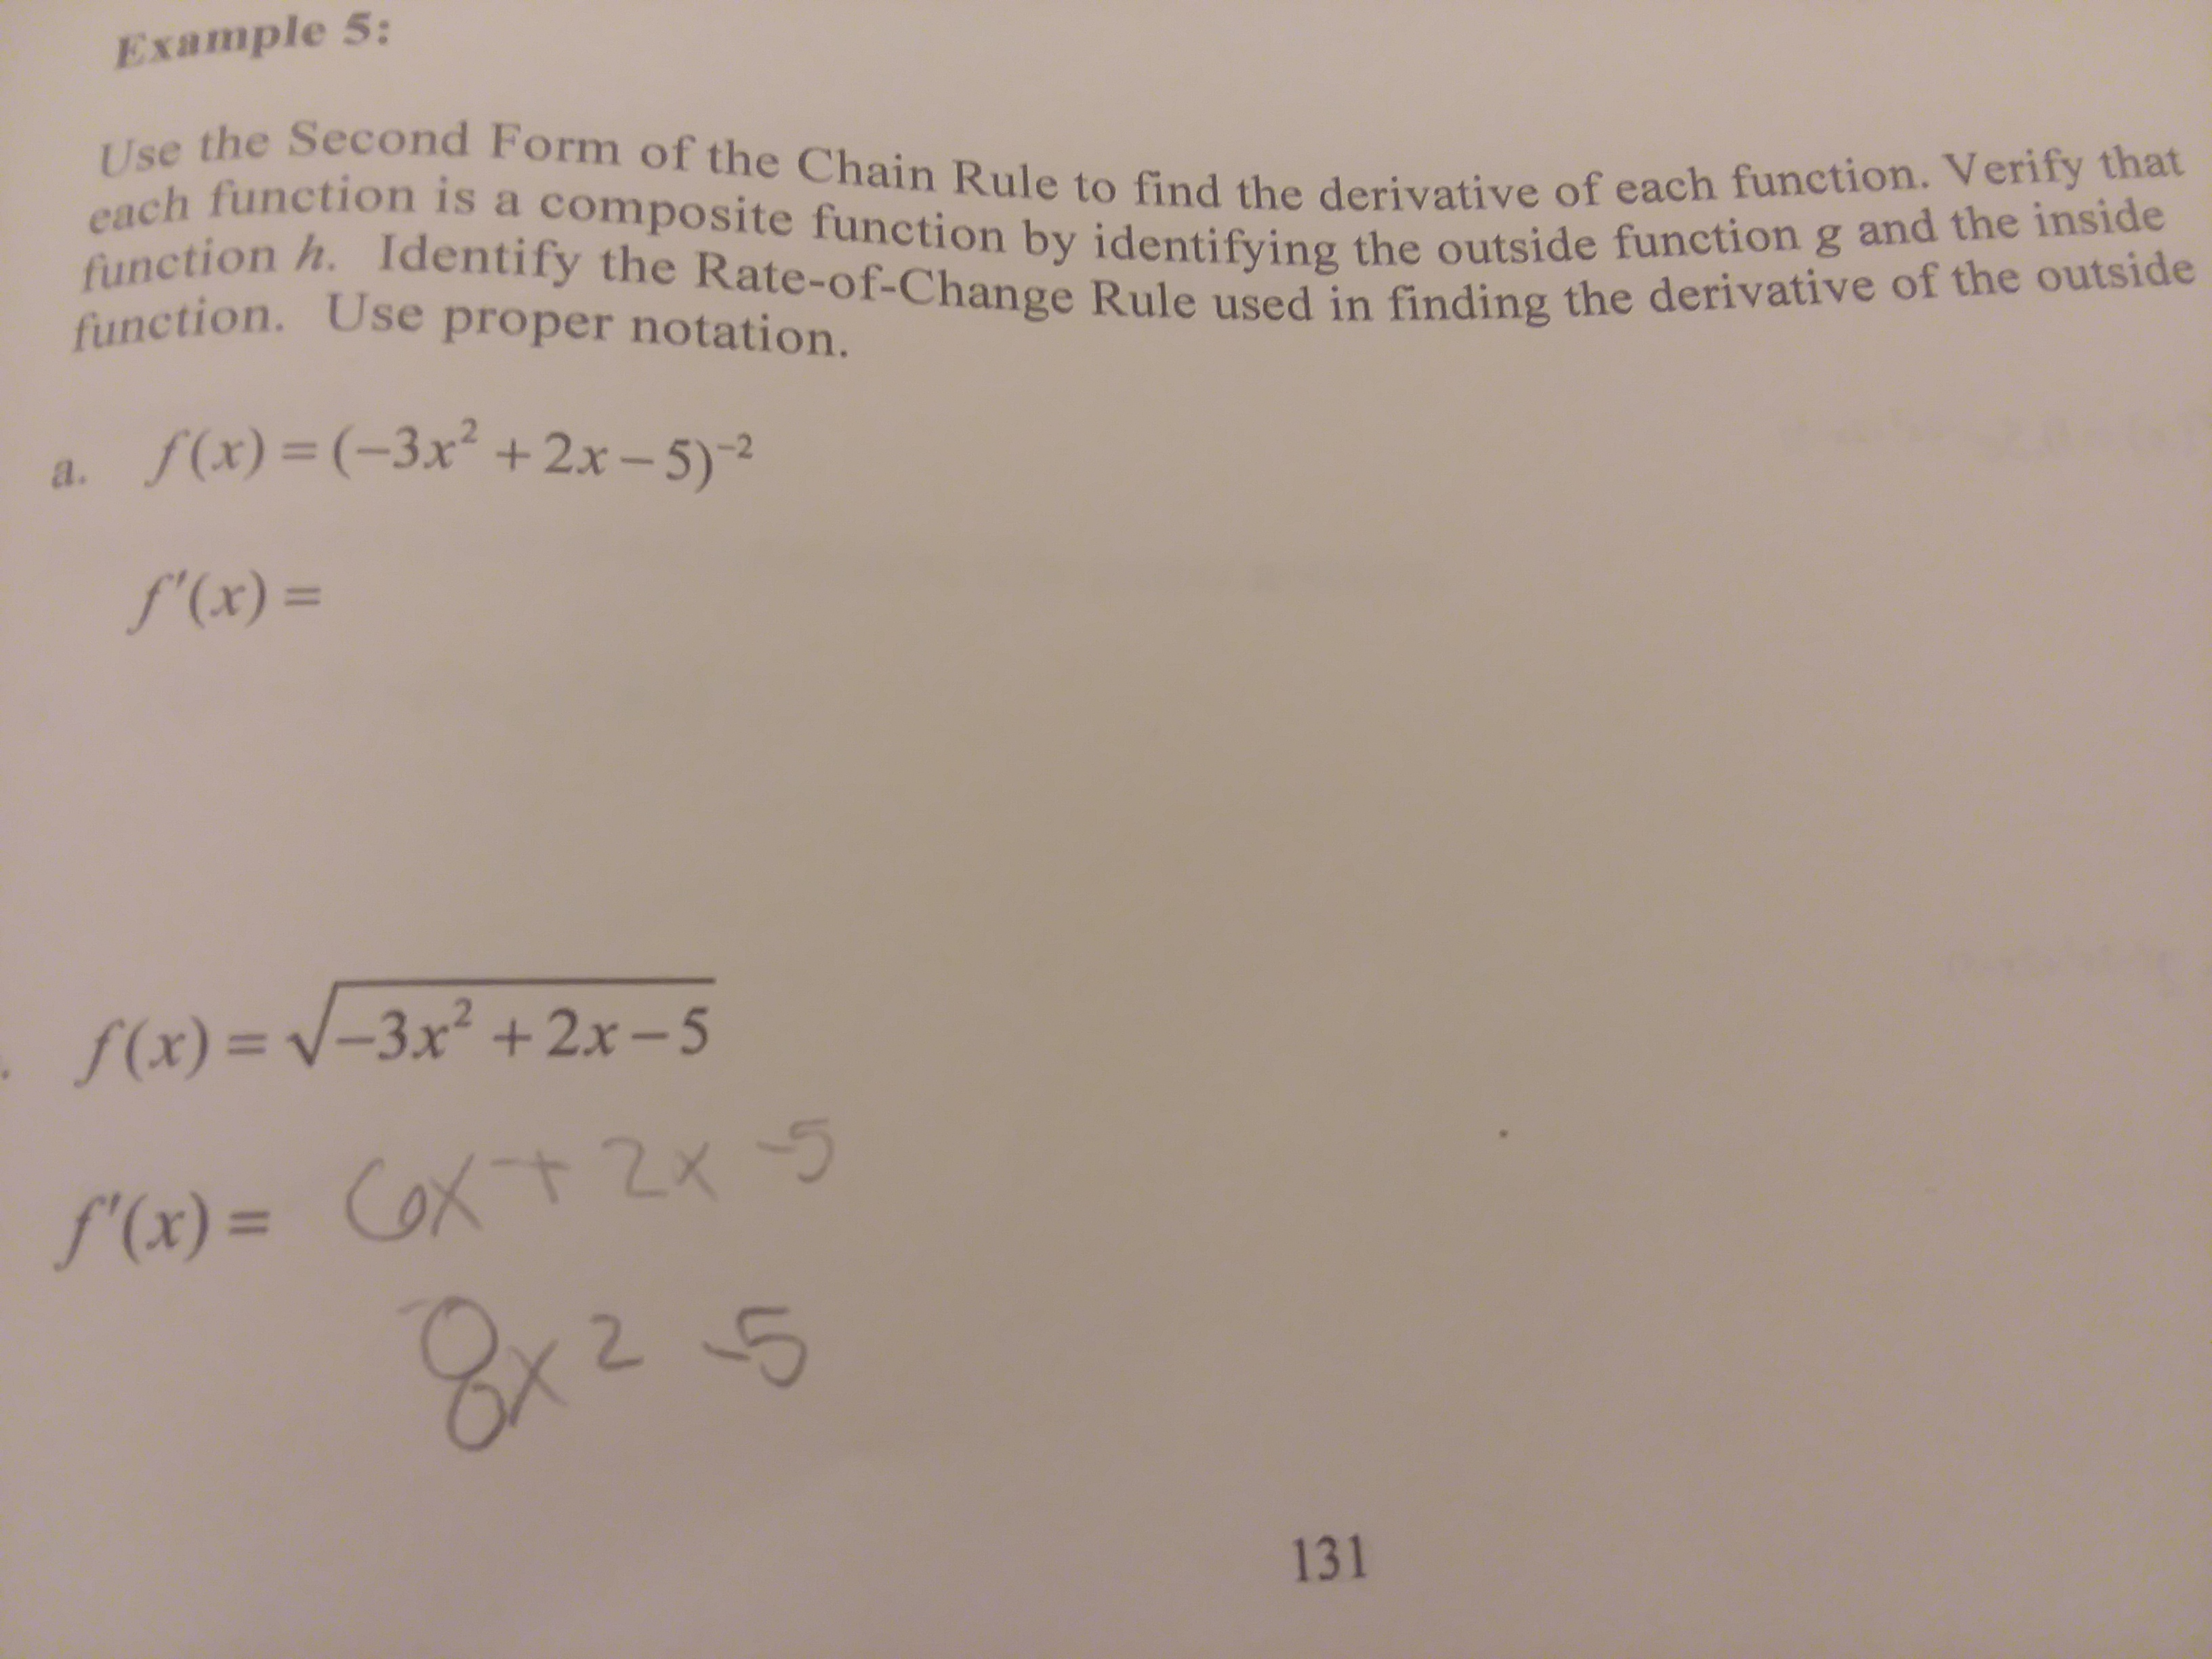 Example 5:
Use the Second Form of the Chain Rule to find the derivative of each function. Verify that
each function is a composite function by identifying the outside function g and the inside
function h. Identify the Rate-of-Change Rule used in finding the derivative of the outside
function. Use proper notation.
a. f(x)= (-3x +2x-5)-2
f'(x) =
f(x) = V -3x +2x -5
S'(x)= CoXt 2x
2 5
CoxtZx
131
